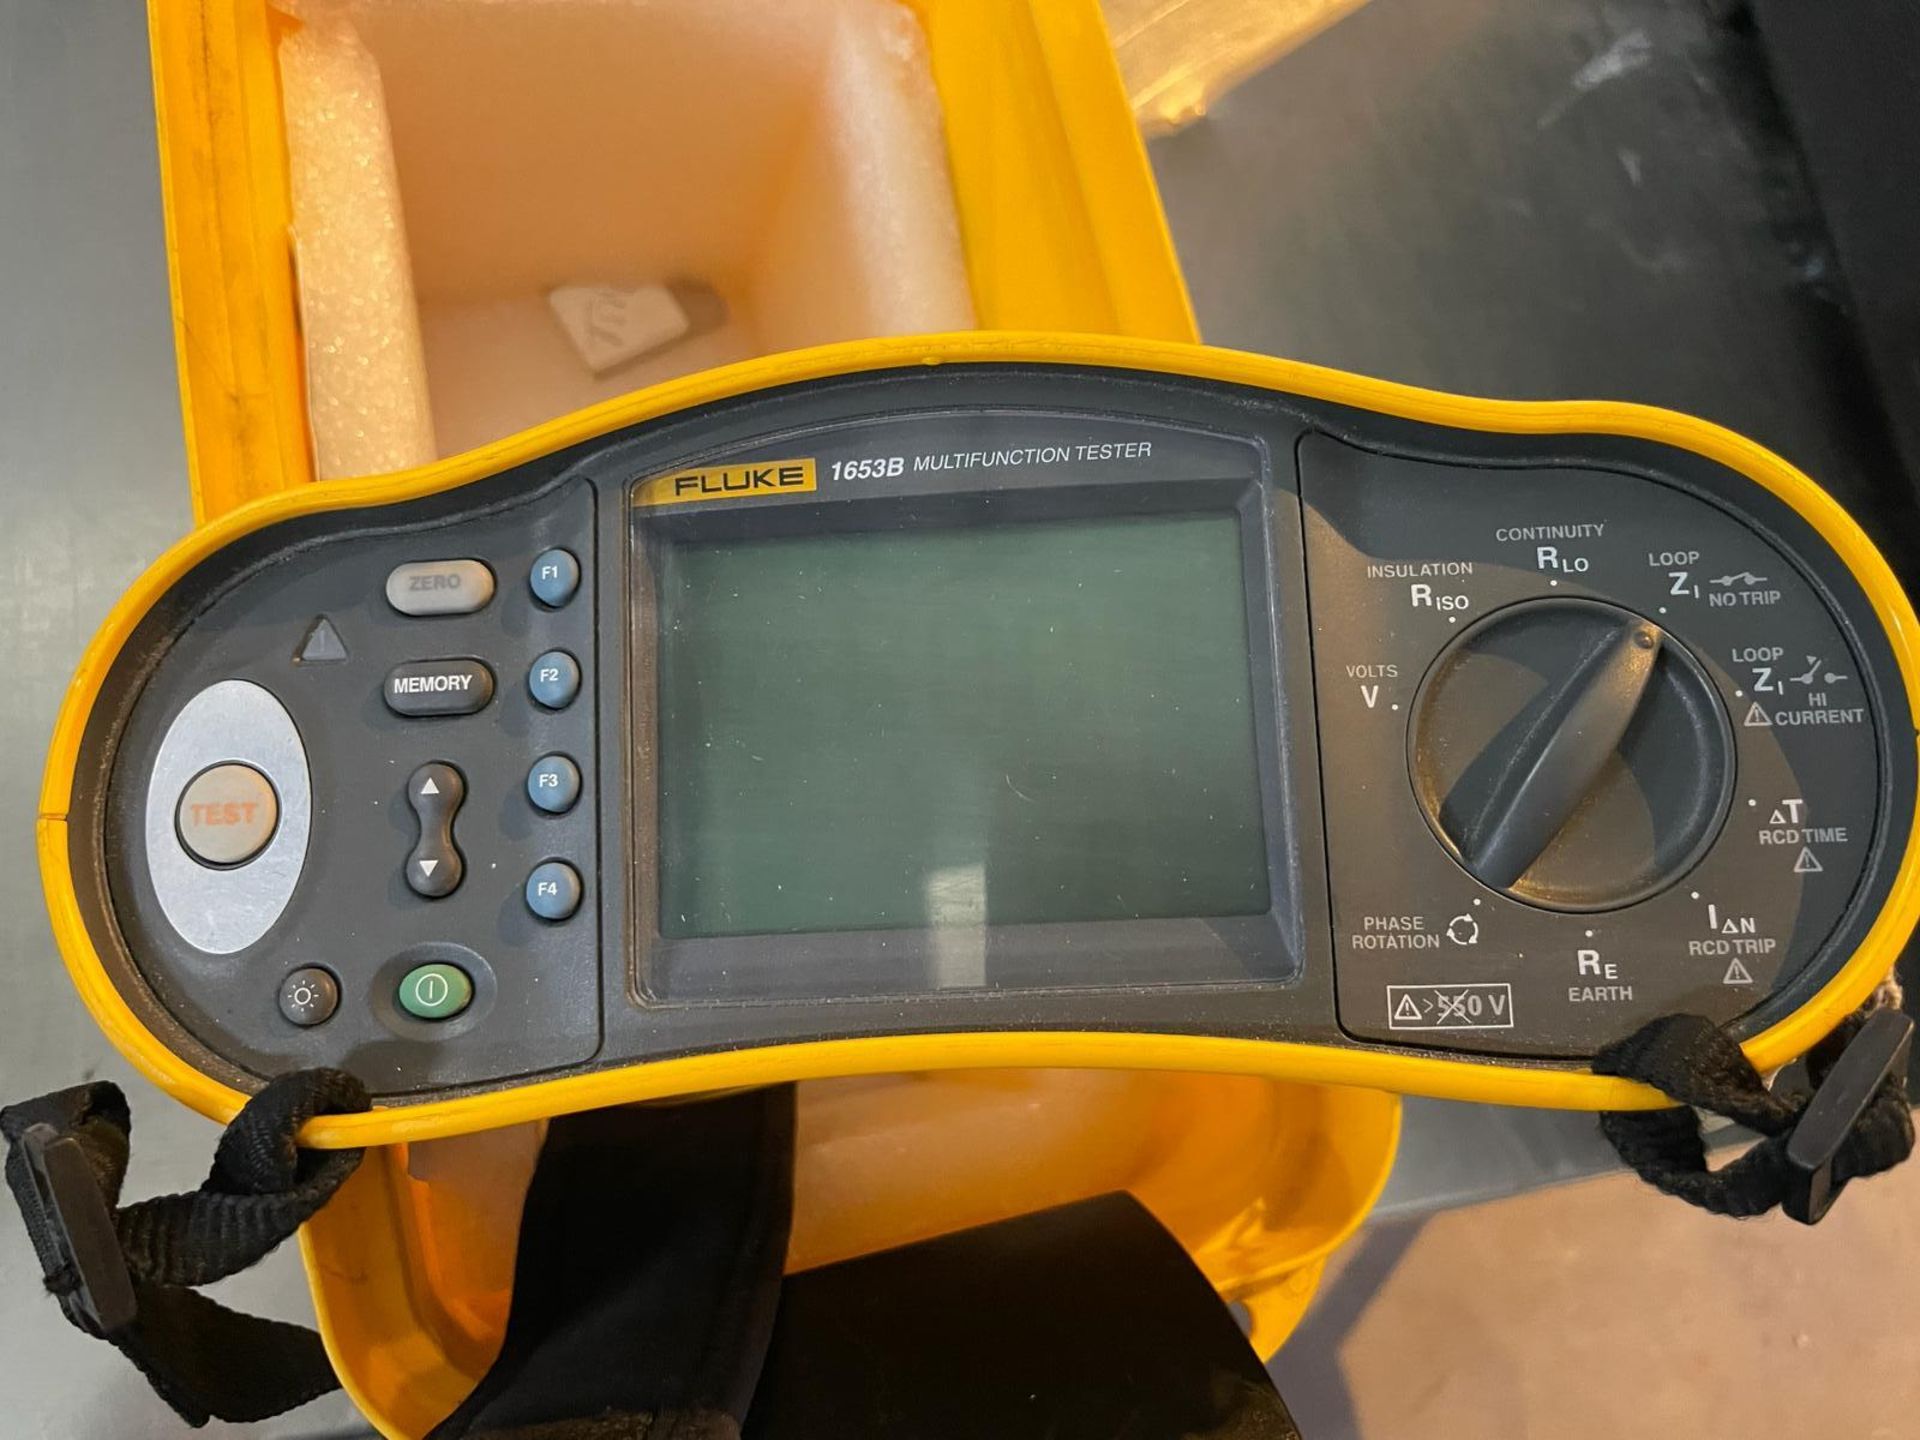 1 x Fluke 1653B Multifunction Tester - Includes Carry Case and Accessories - Image 12 of 12